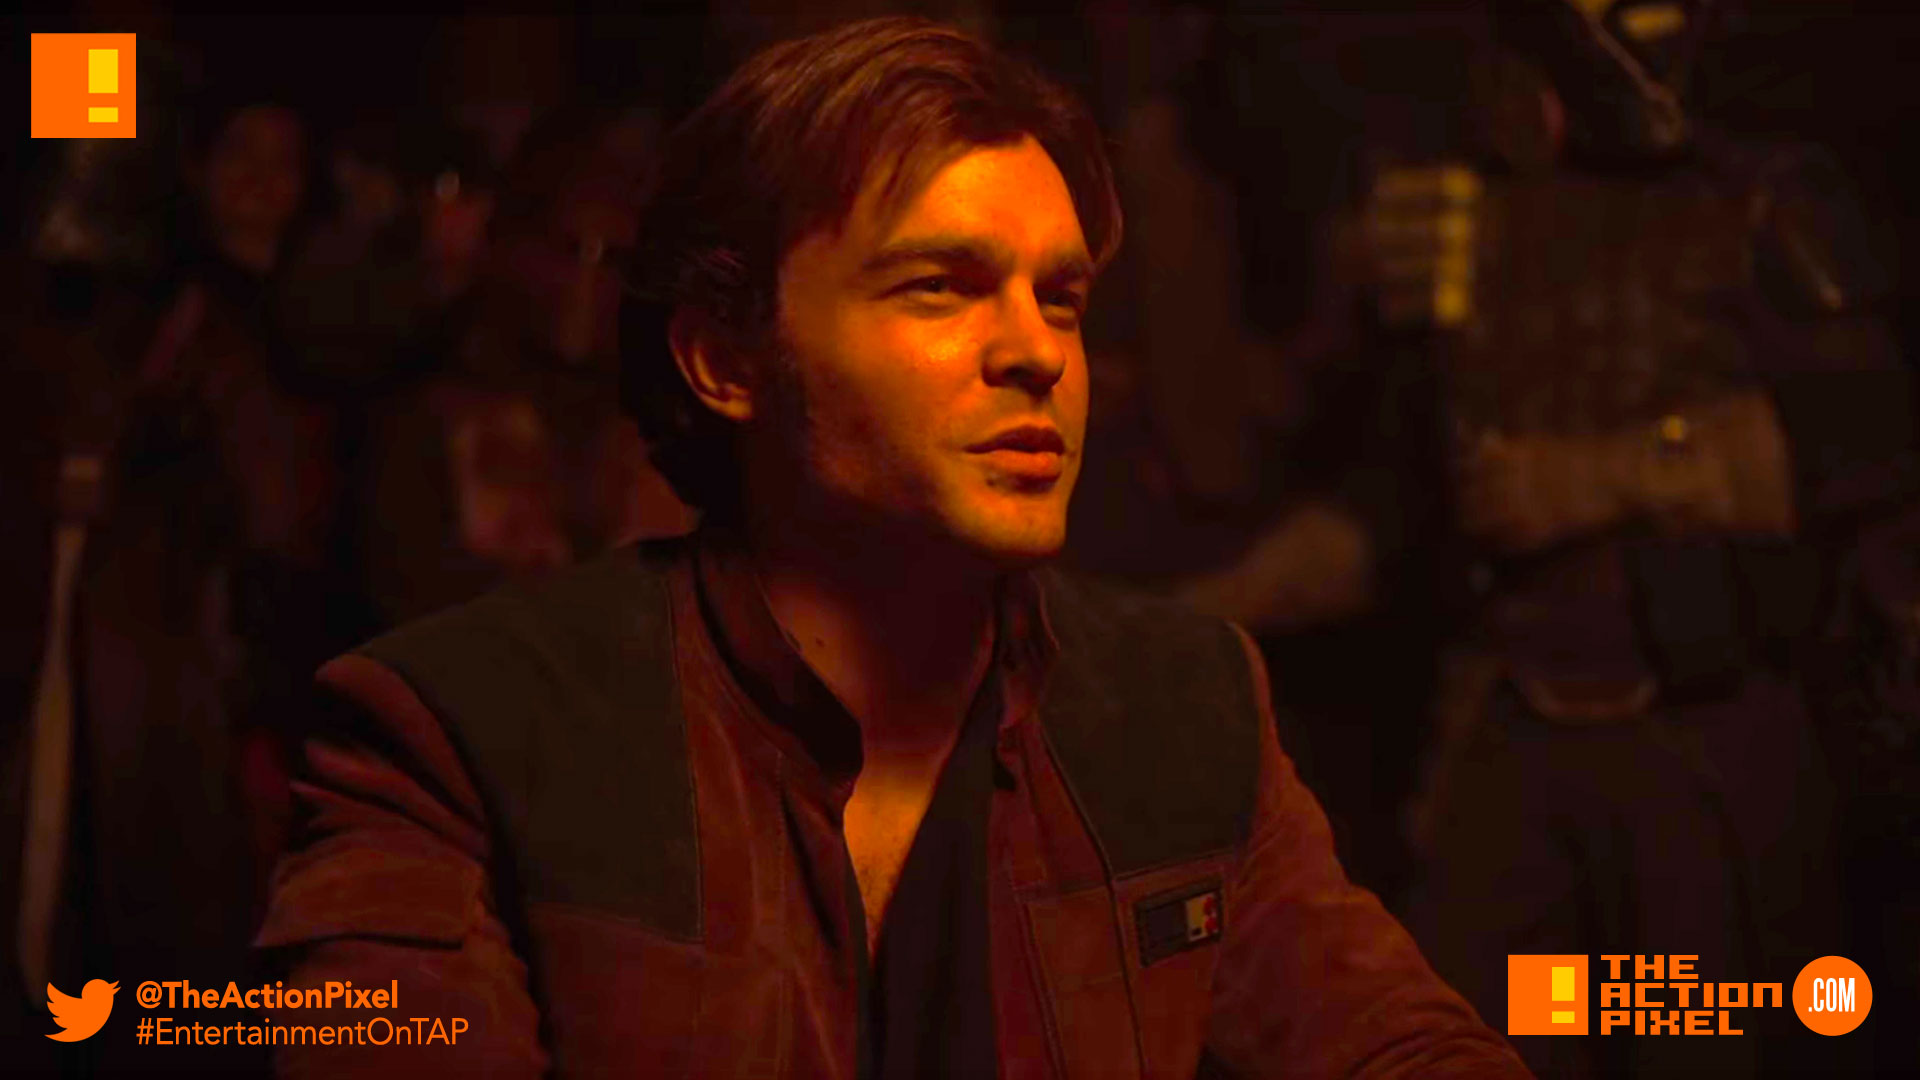 ron howard, han solo, a star wars story, alden ehrenreich, han solo, the action pixel, star wars, solo movie, han solo solo movie, a star wars story, entertainment on tap, donald glover,woody harrelson,big game, tv spot, official trailer